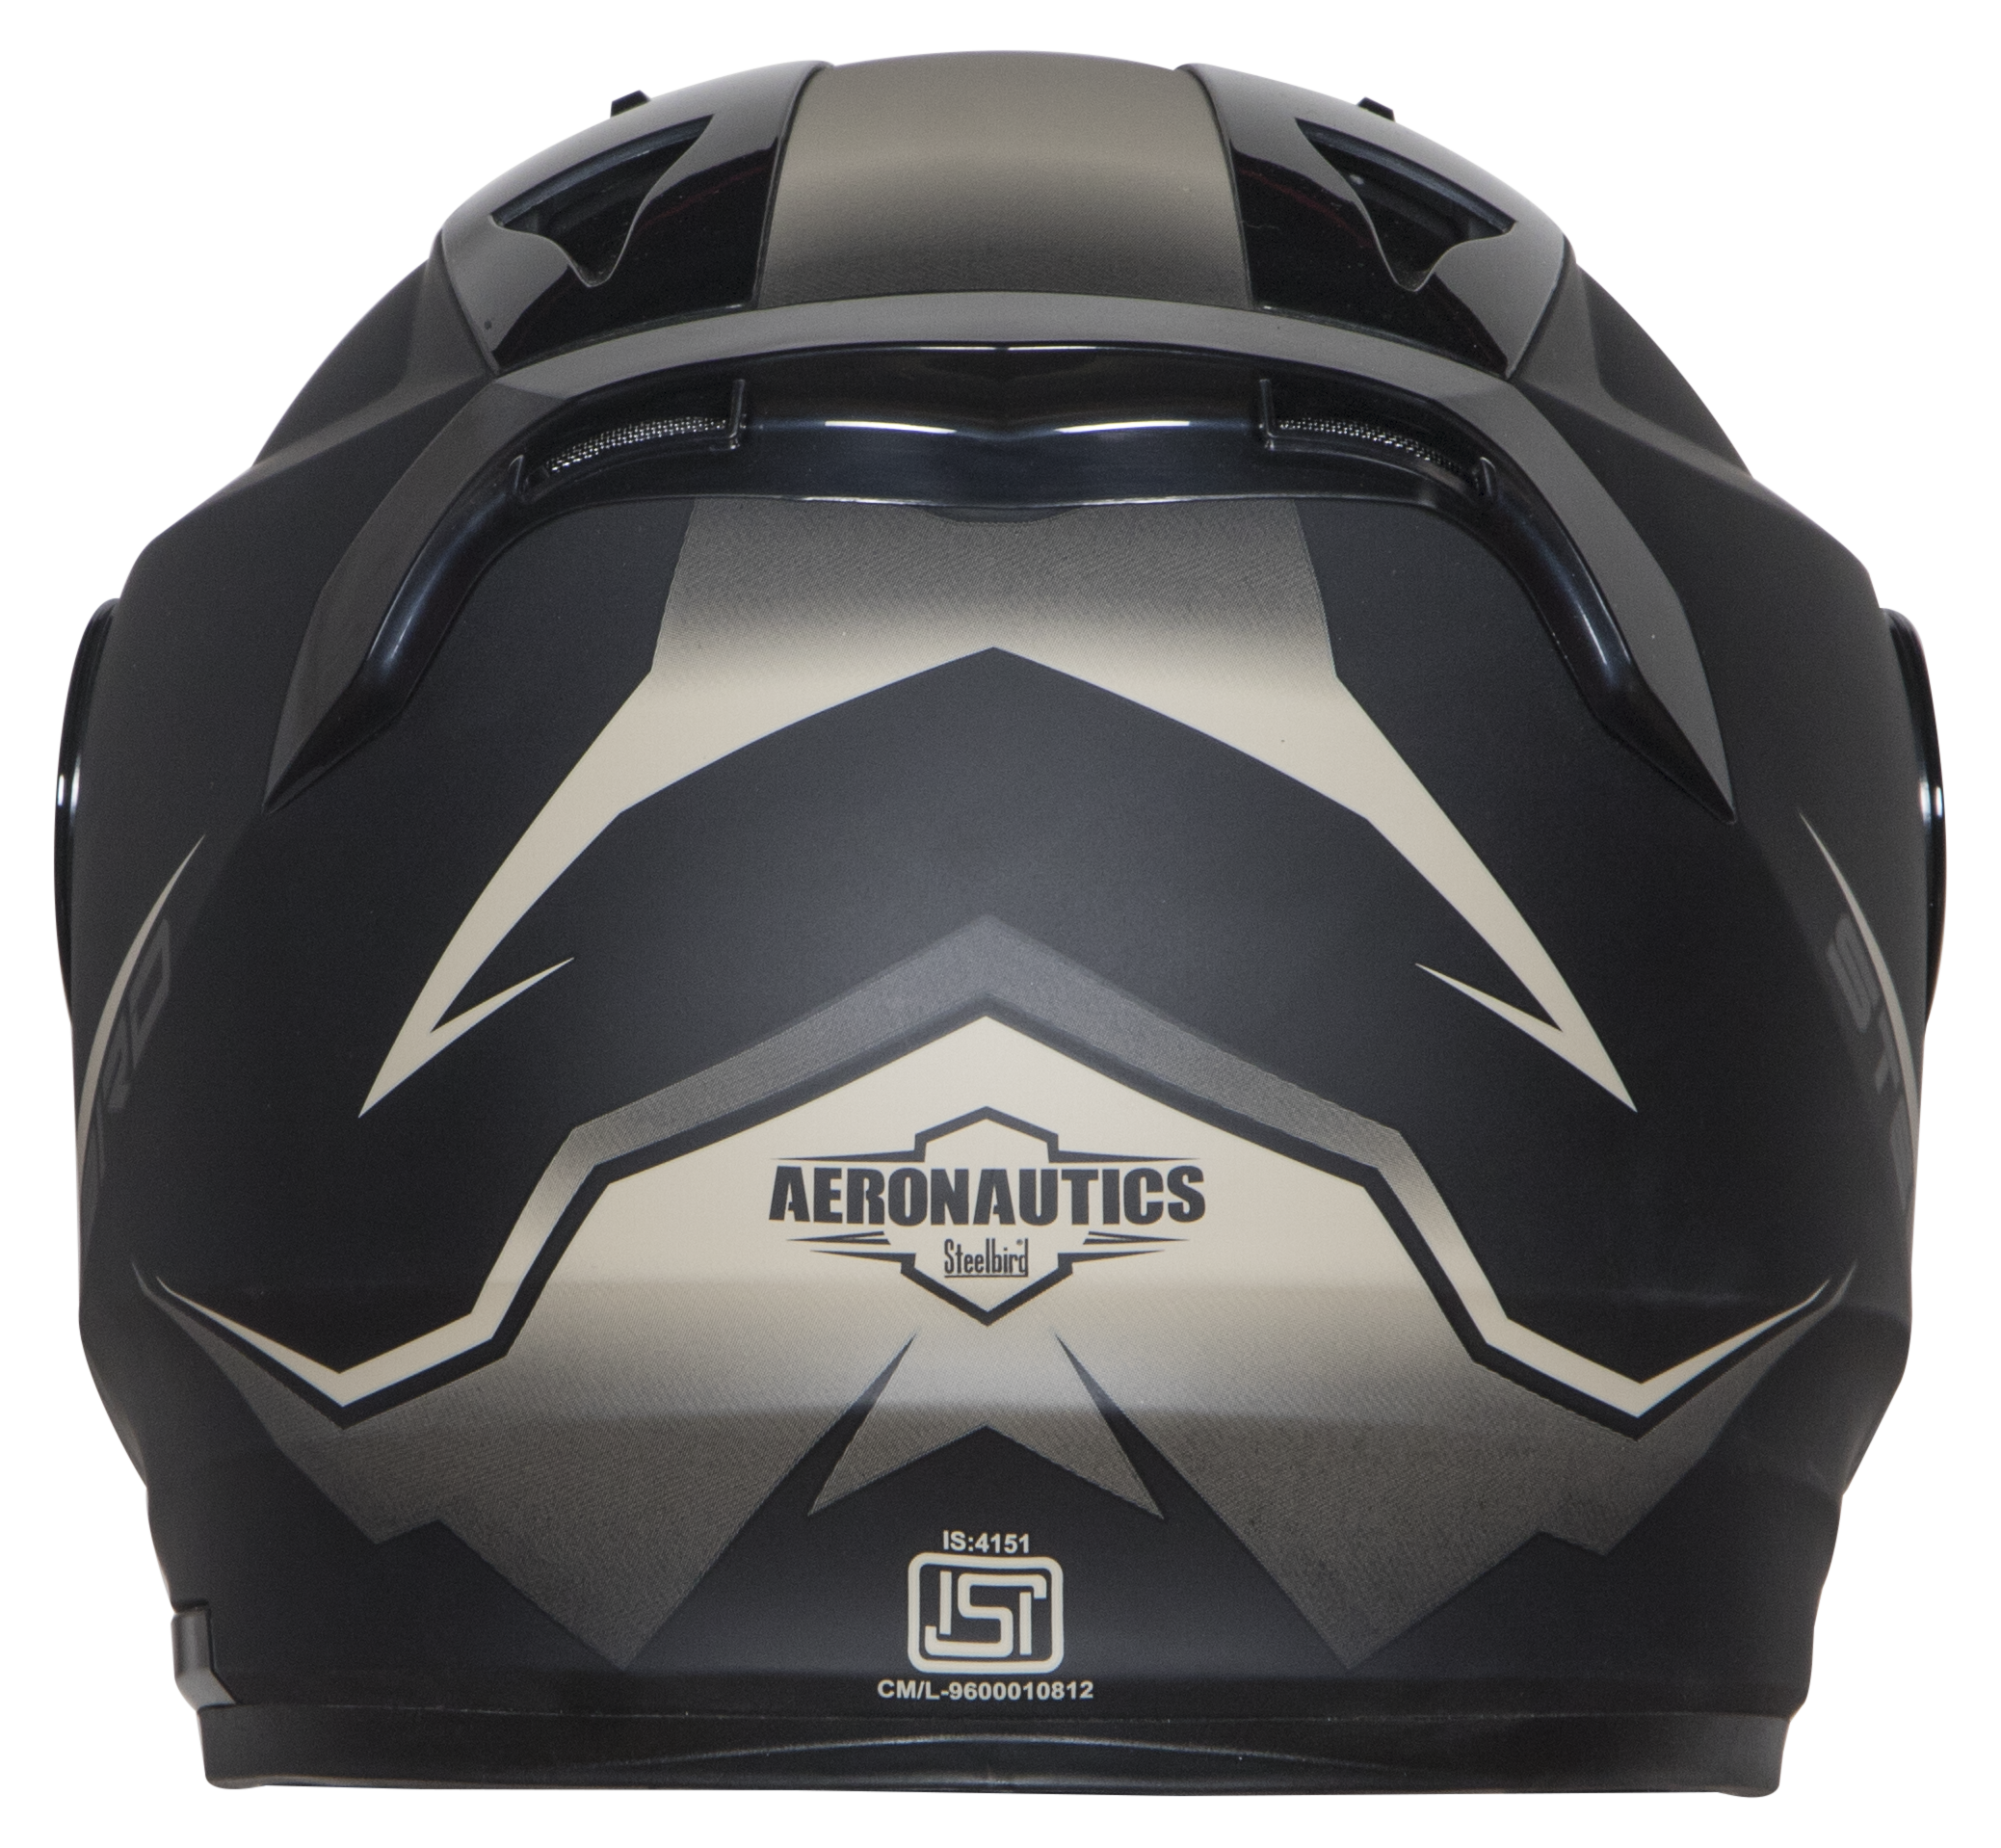 SA-1 WHIF Mat Black With Desert Storm(Fitted With Clear Visor Extra Chrome Silver Visor Free)